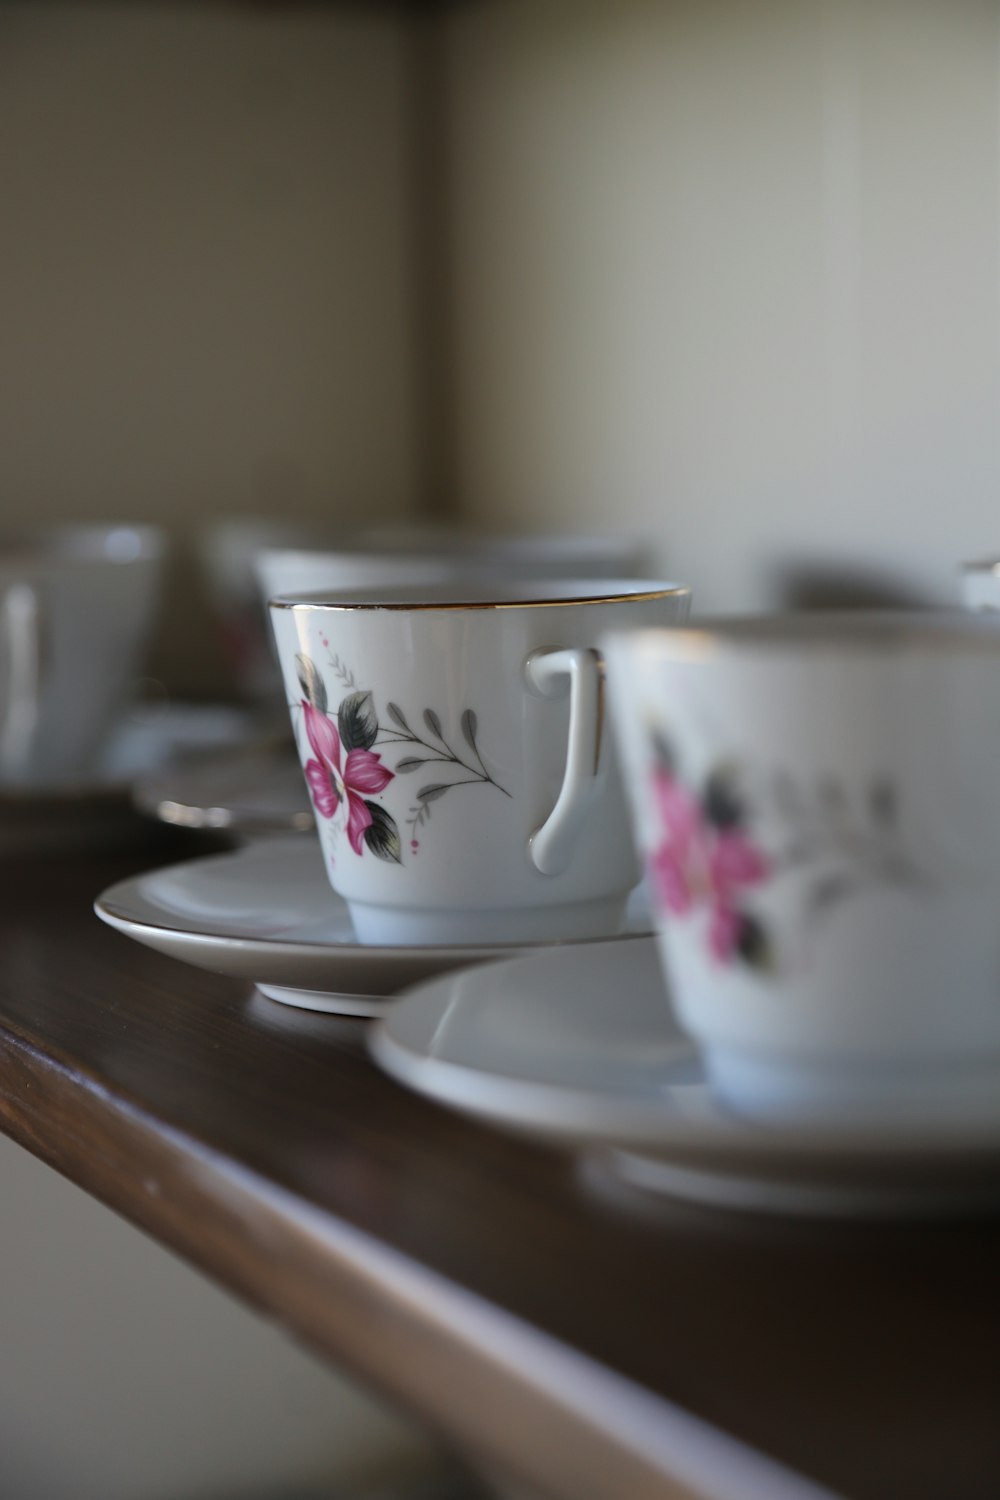 a close up of a cup and saucer on a table